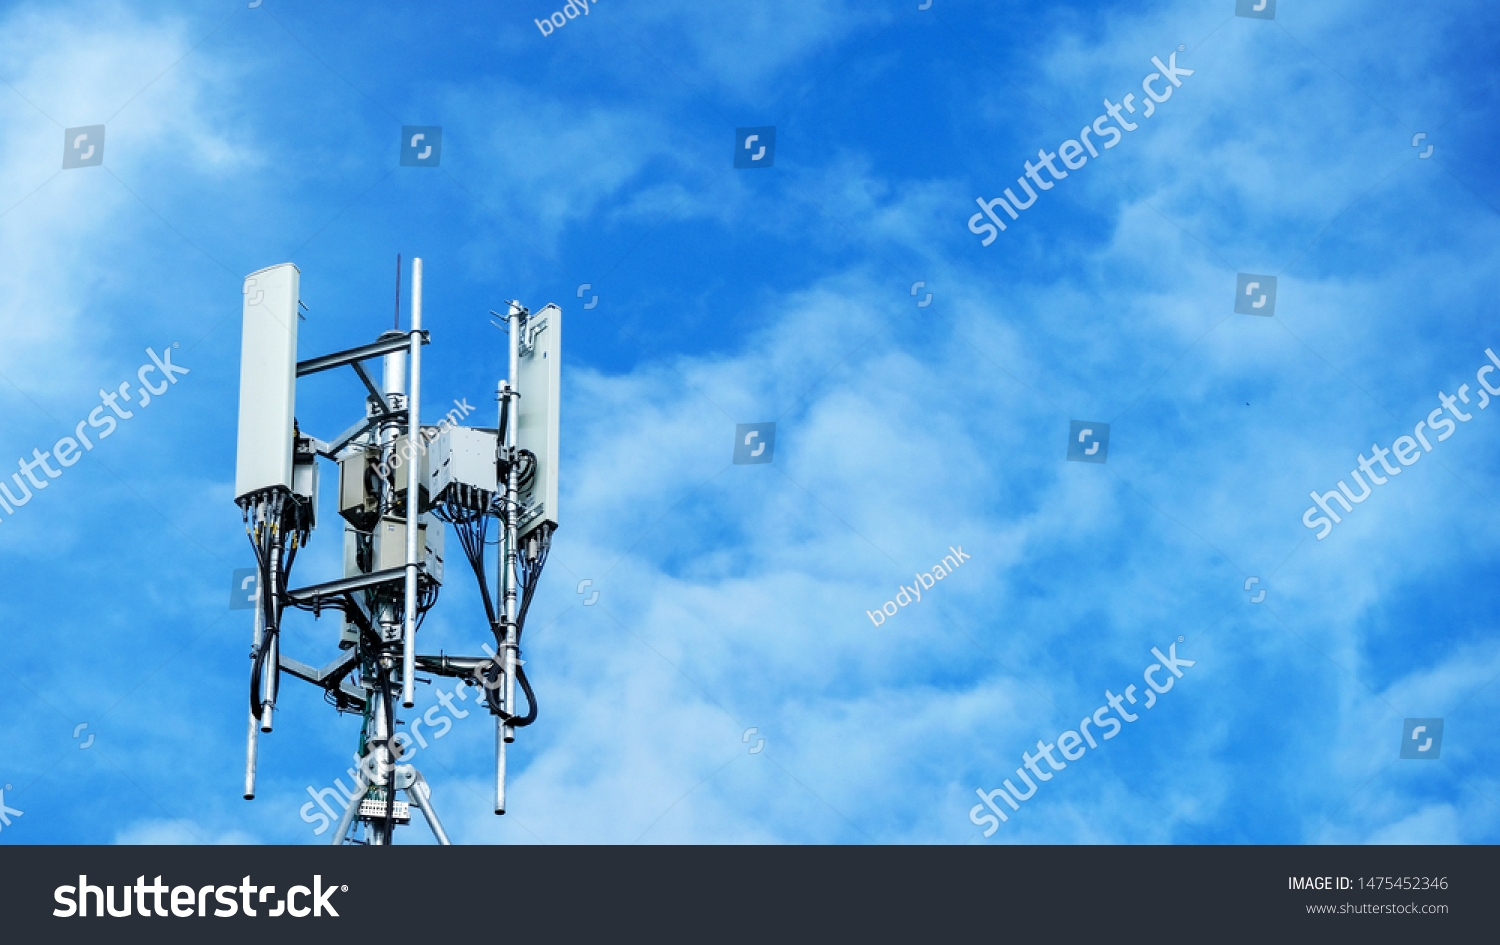 Technology on the top of the telecommunication. Cellular phone antennas on a building roof.Telecommunication mast television antennas.Receiving and transmitting stations. #1475452346